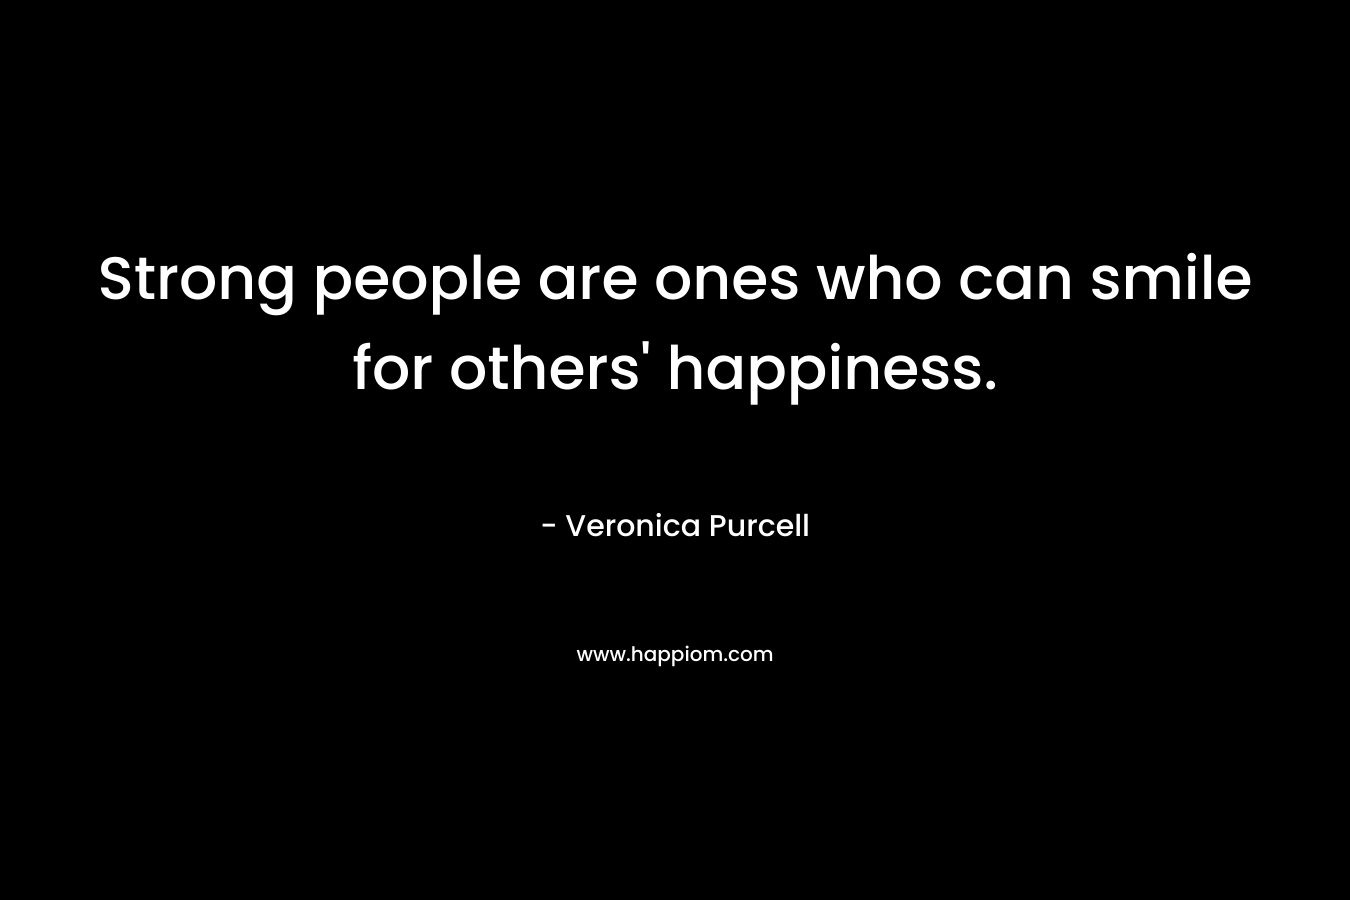 Strong people are ones who can smile for others' happiness.